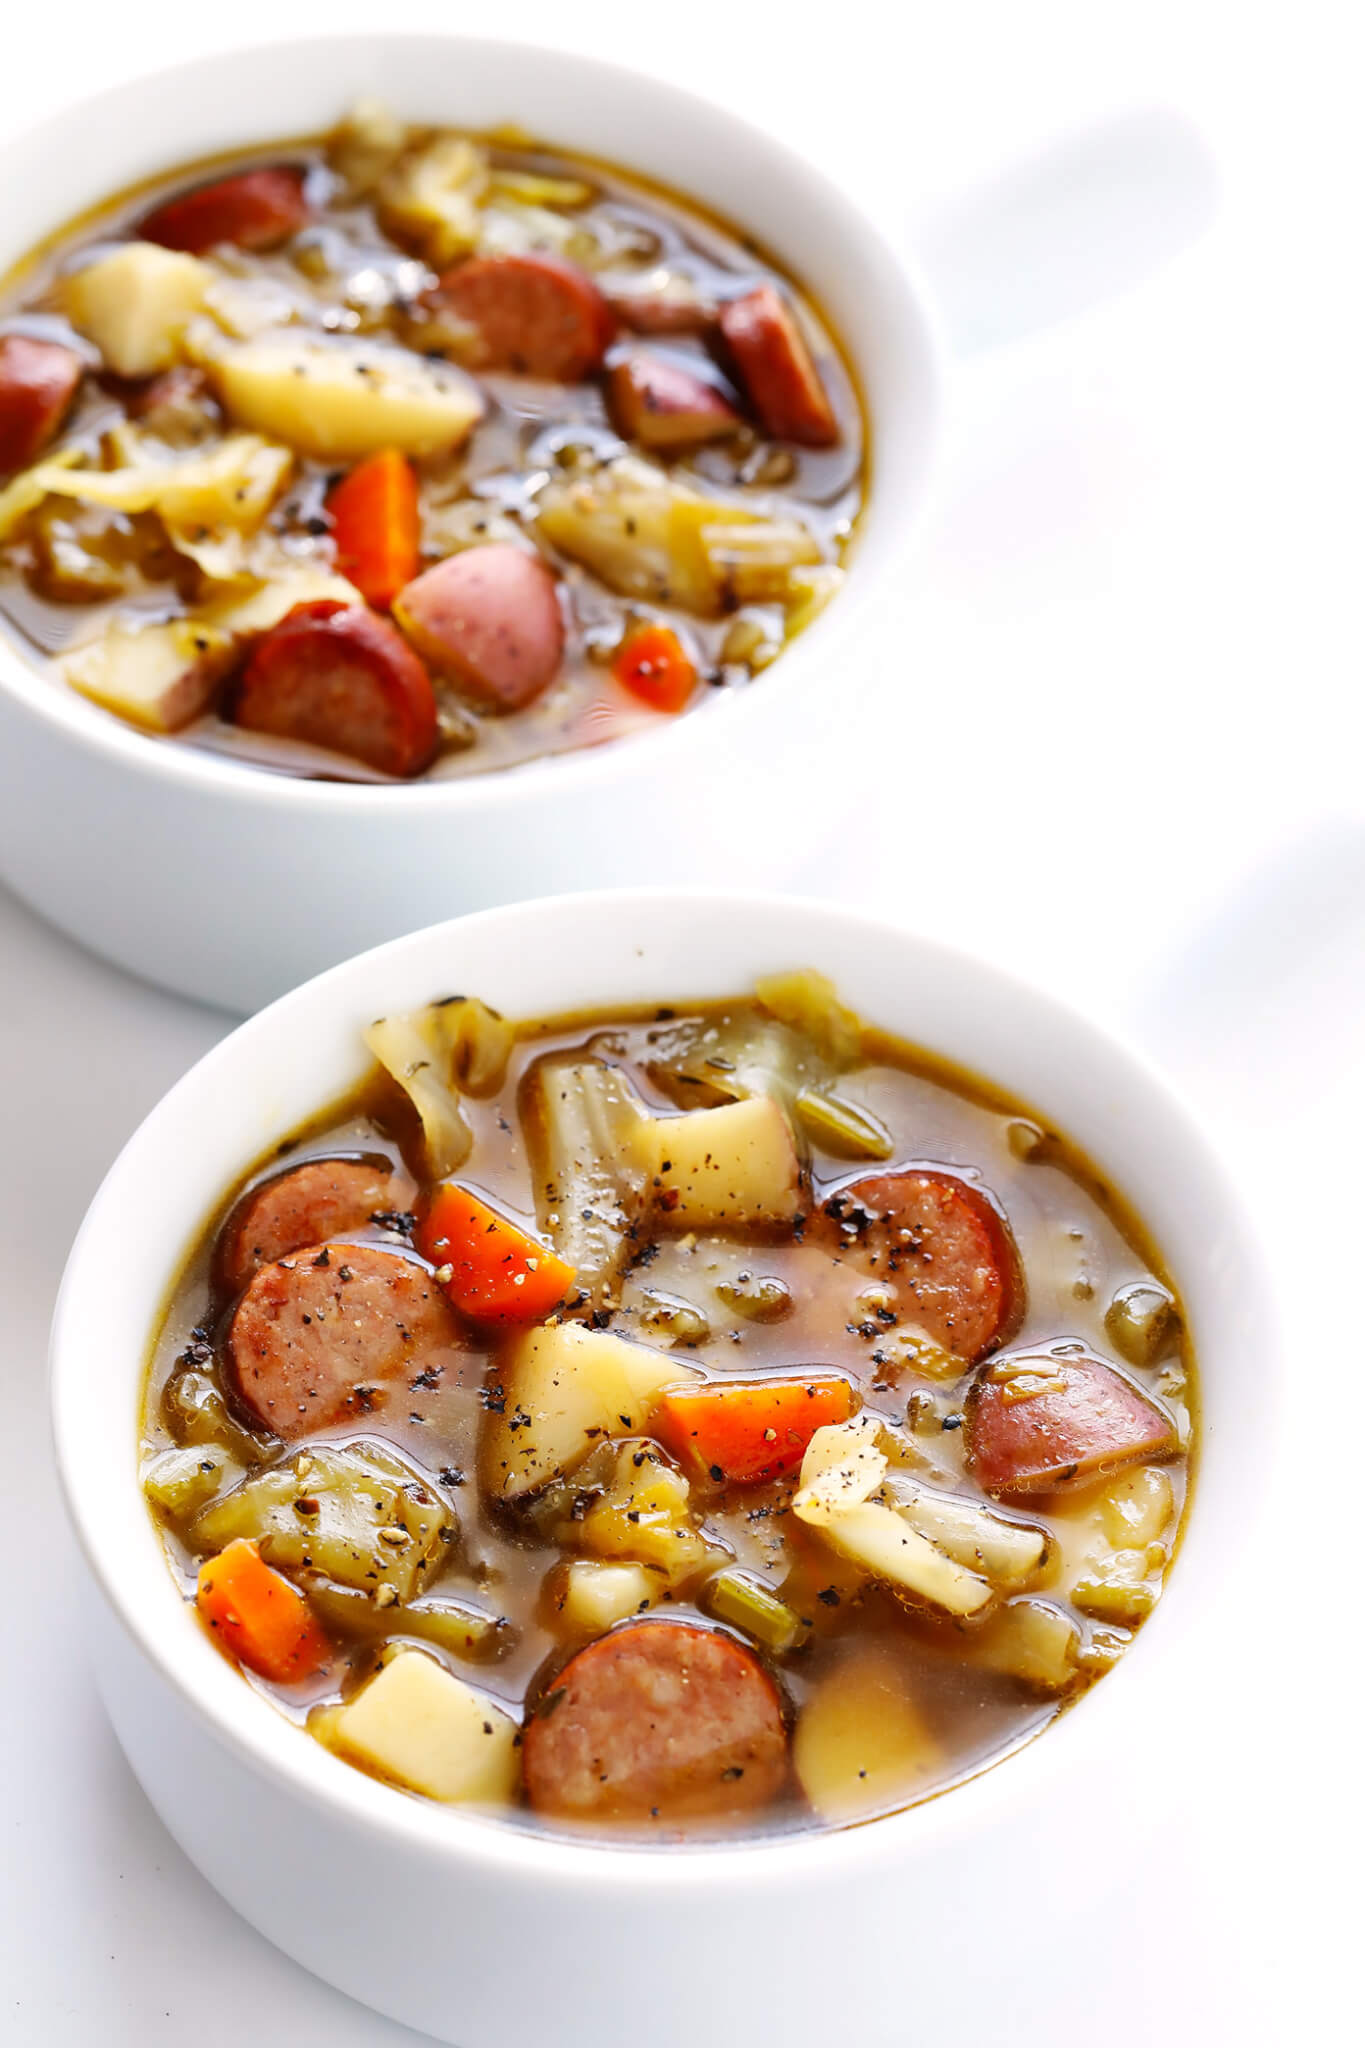 This Cabbage, Sausage and Potato Soup recipe is hearty and comforting, easy to make, and so savory and delicious. My kind of cabbage soup! | gimmesomeoven.com (Gluten-Free / Dairy-Free)